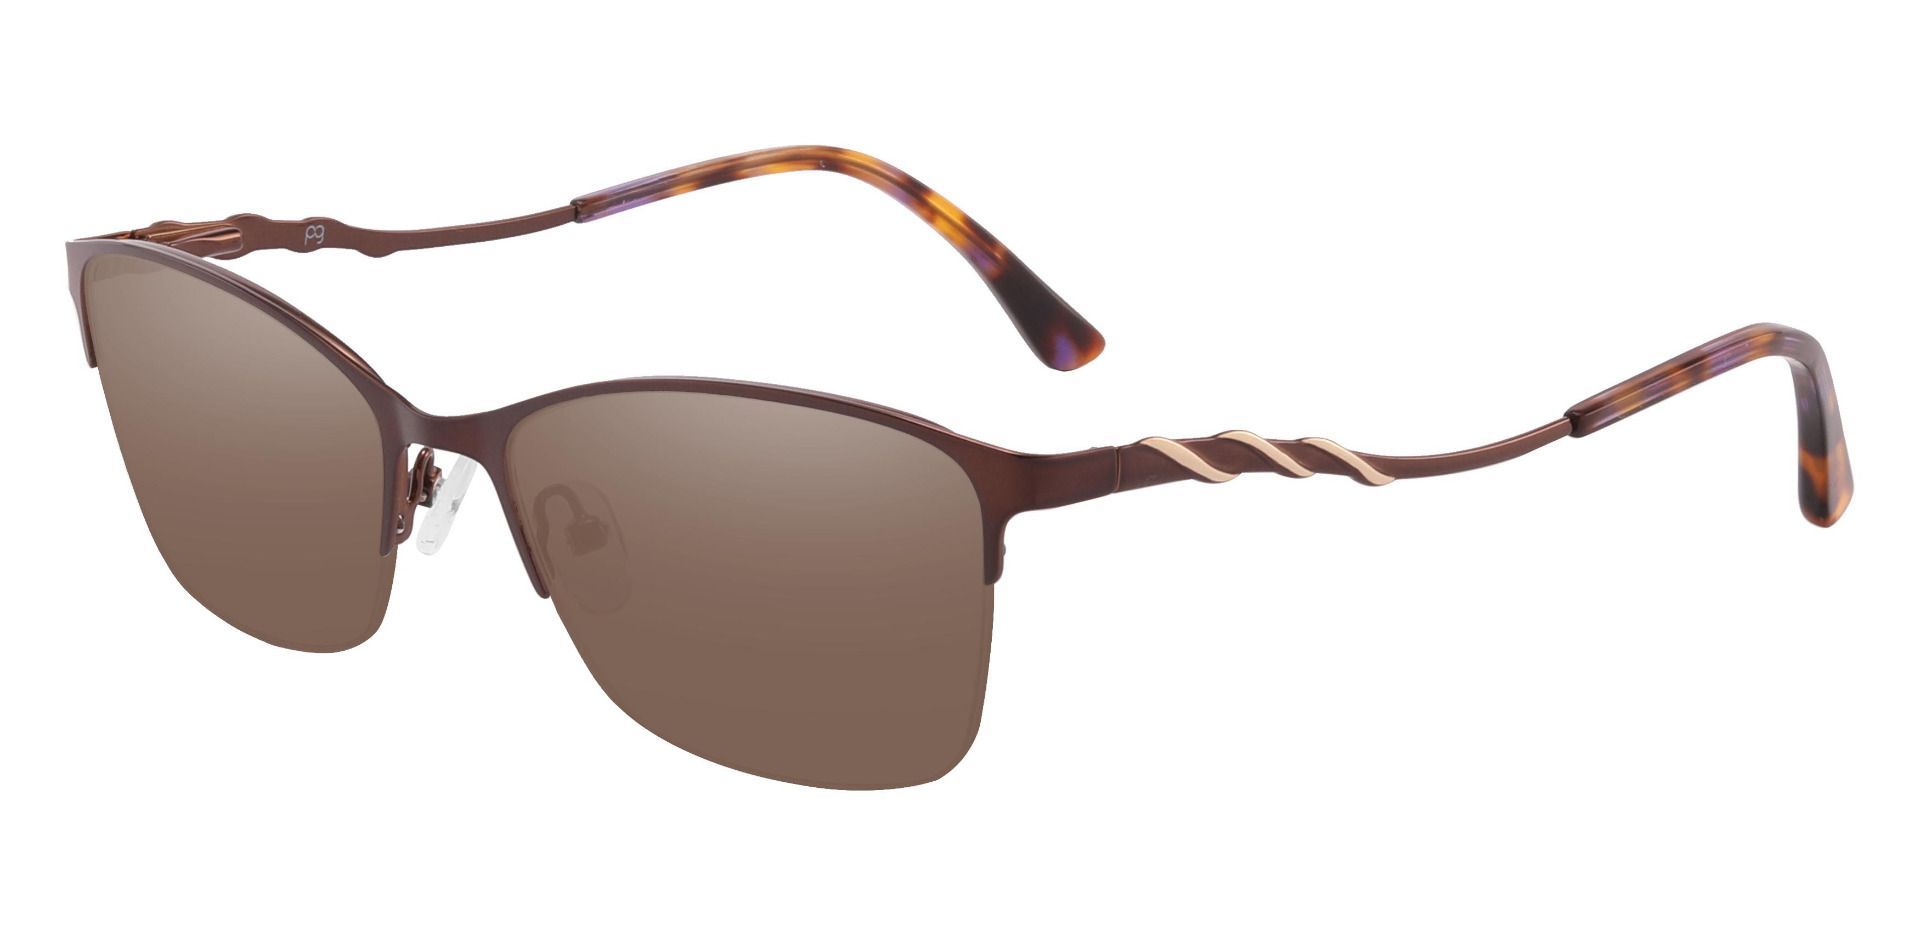 Milan Browline Non-Rx Sunglasses - Brown Frame With Brown Lenses